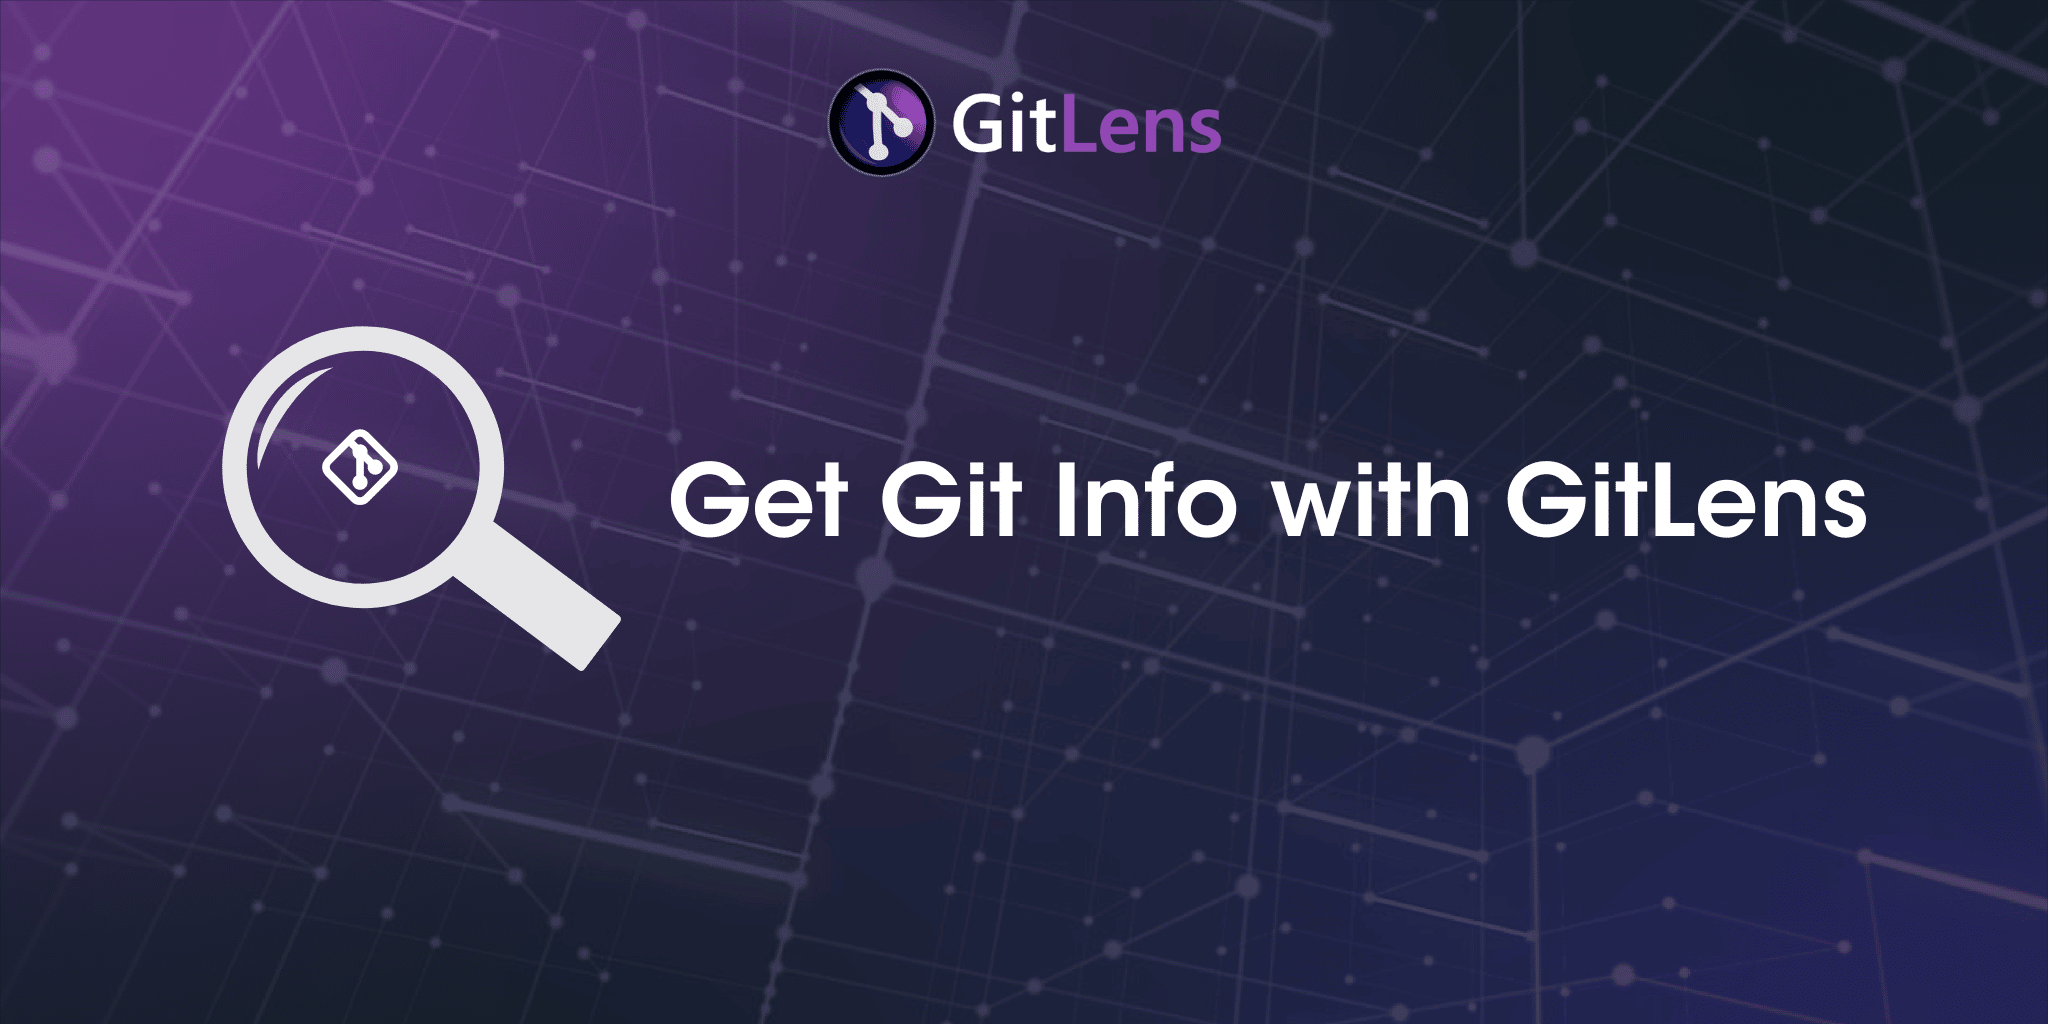 GitLens logo with magnifying glass with a Git logo inside "Get Git Info with GitLens"